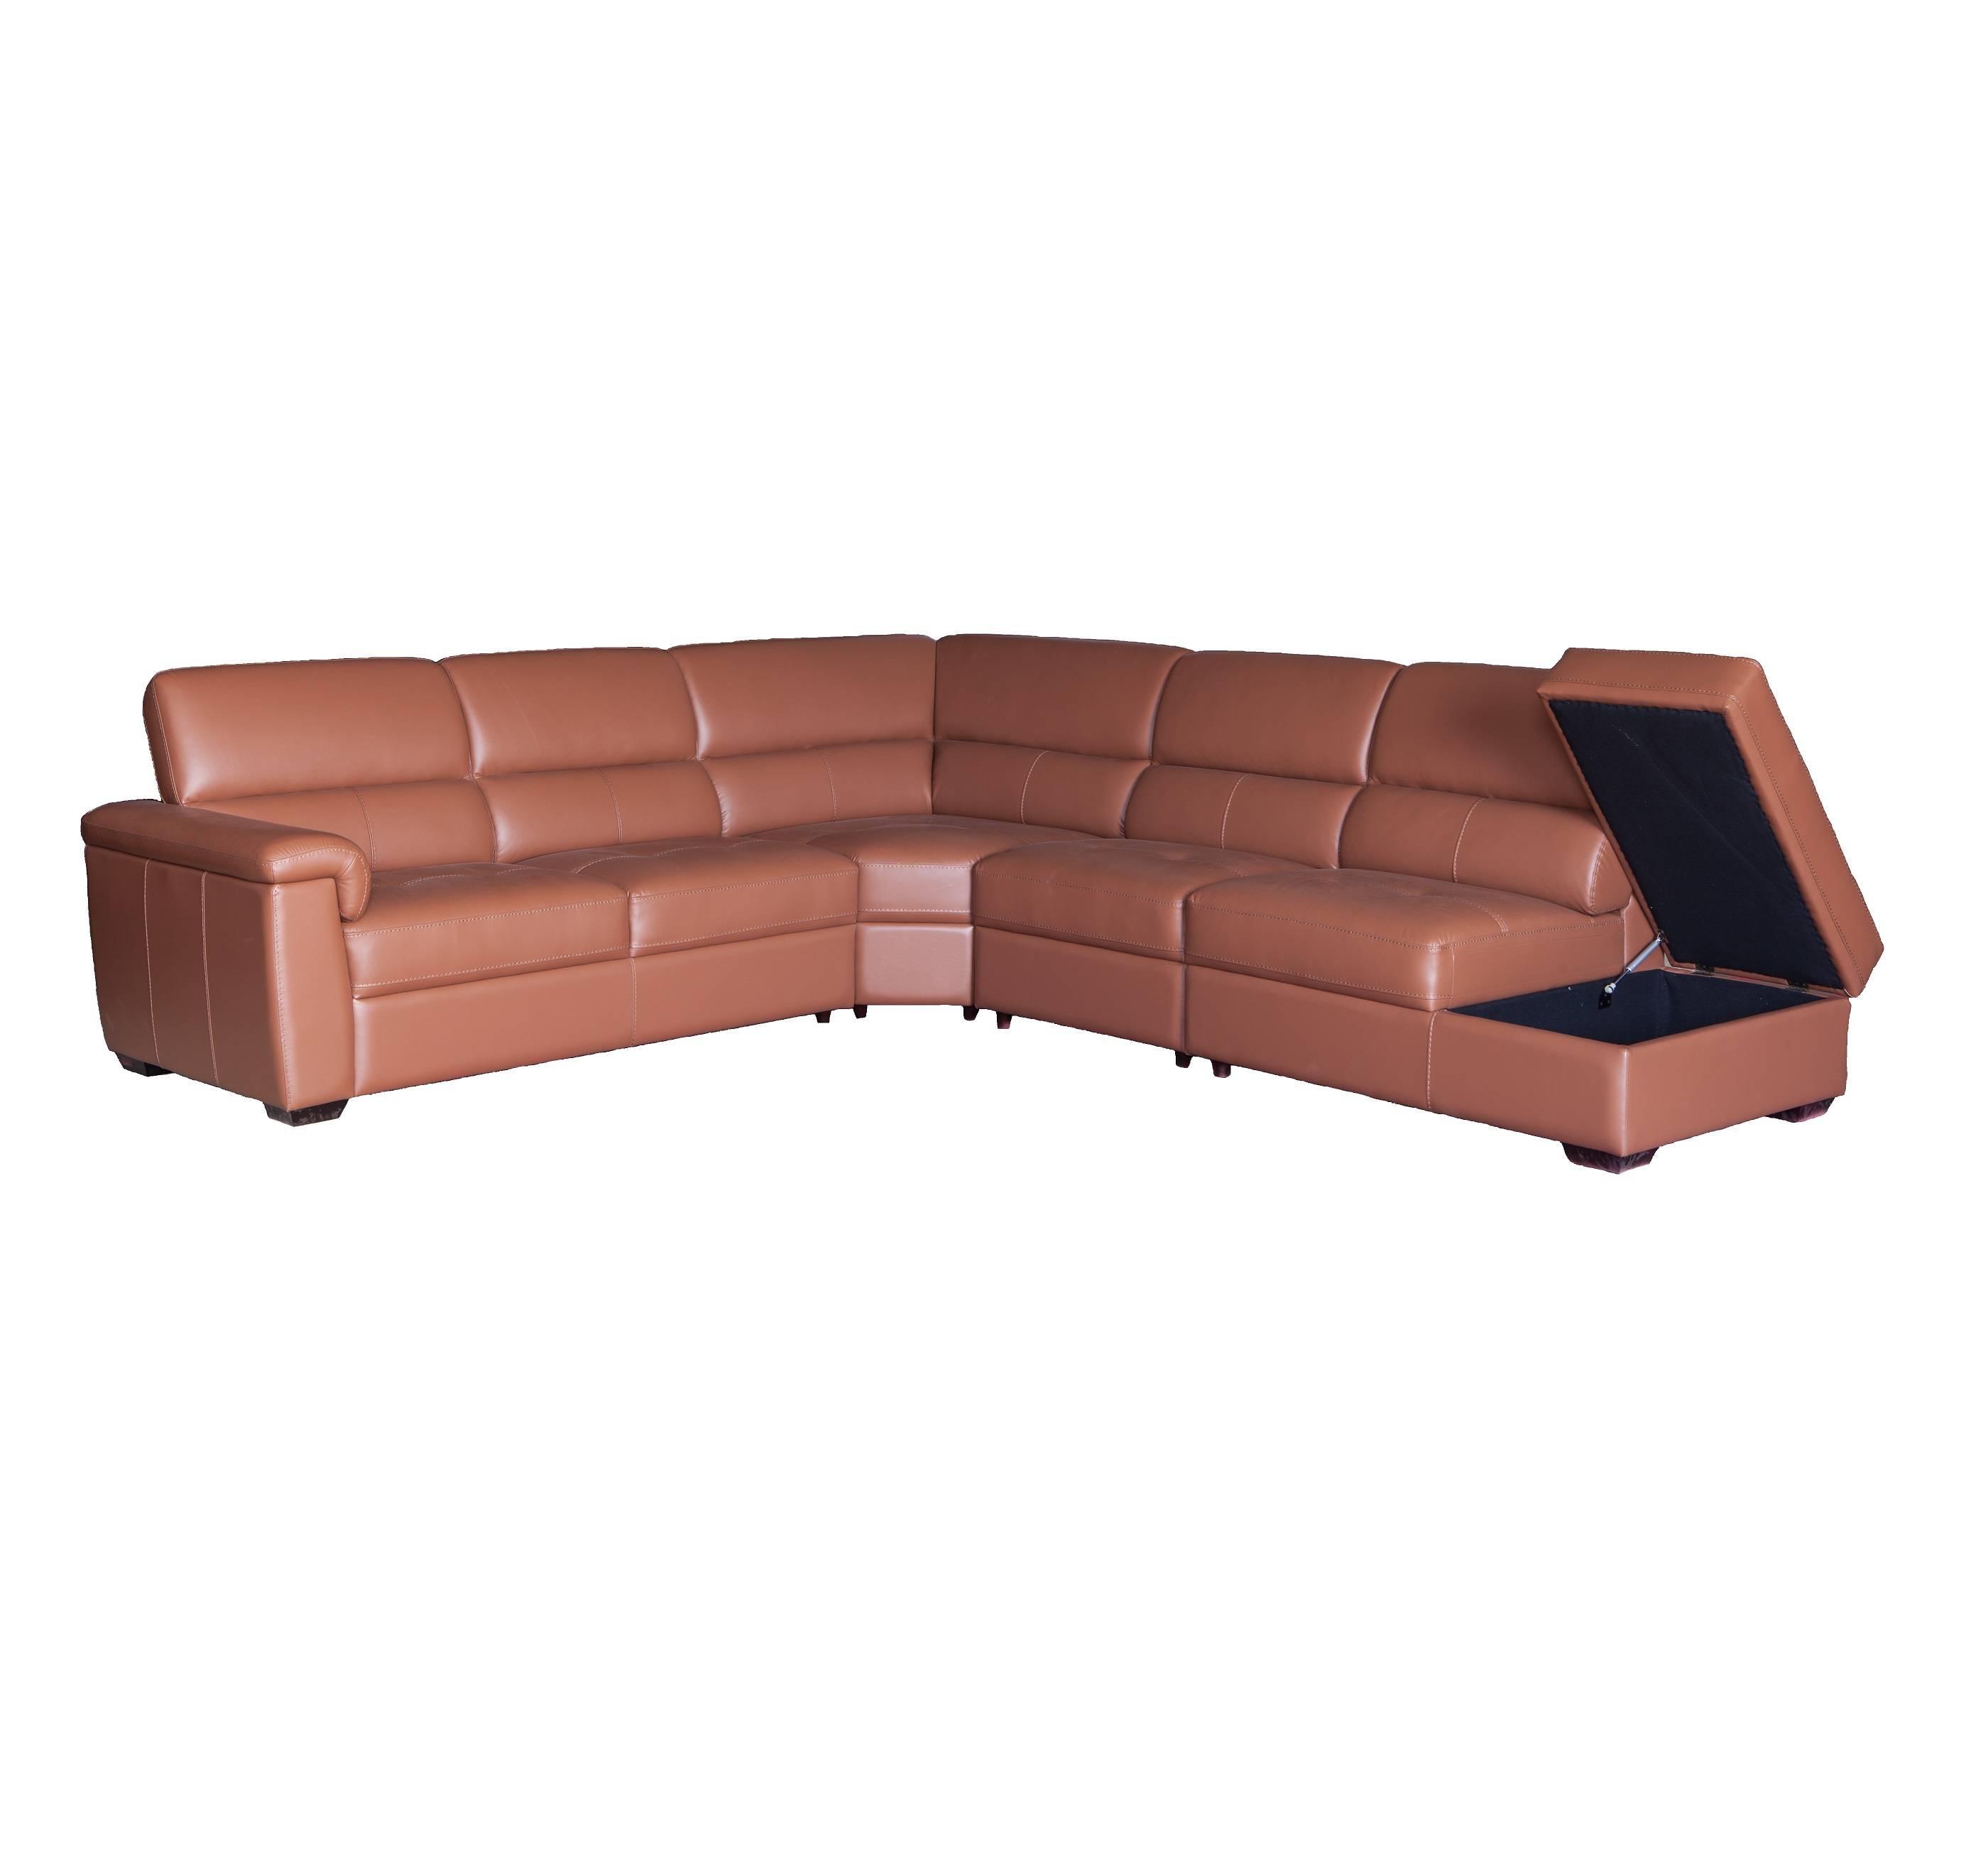 Factory Free sample Leather Rocker Recliner Sofa - New design brown leather 6 seater l shape sectional sofa set – Chuan Yang